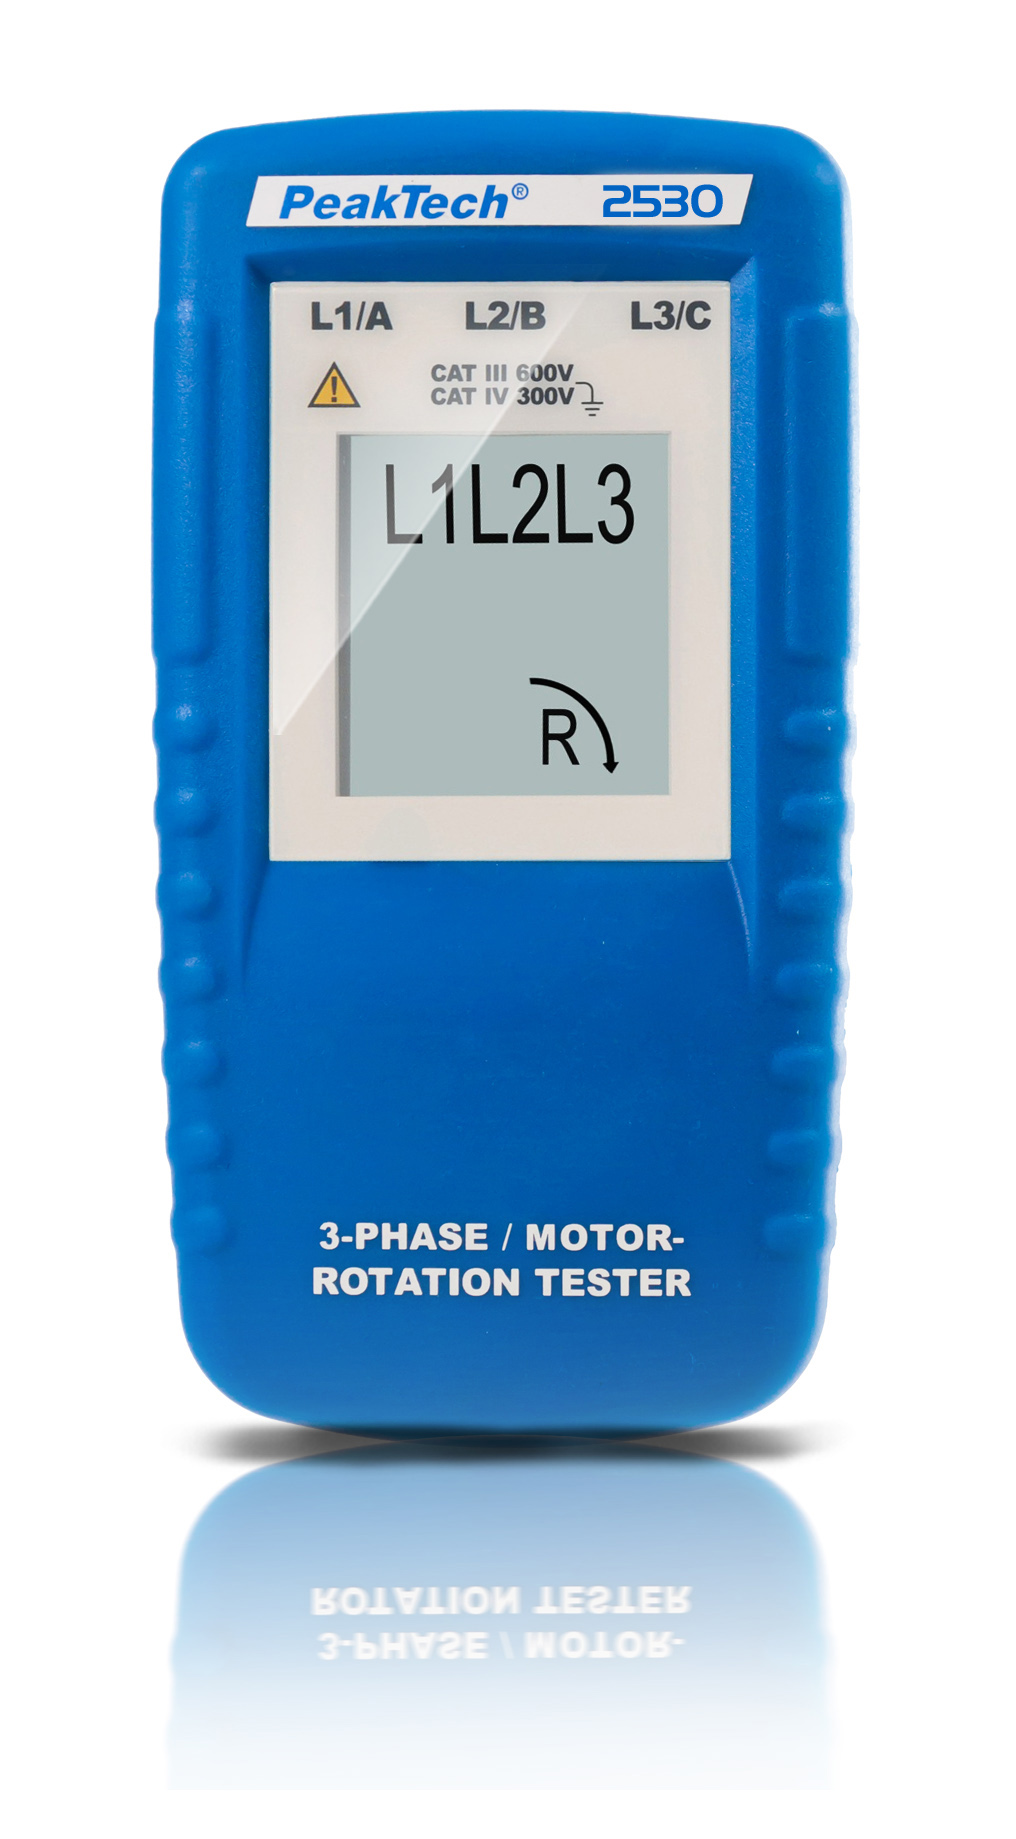 «PeakTech® P 2530» 3-phase direction indicator with LCD display